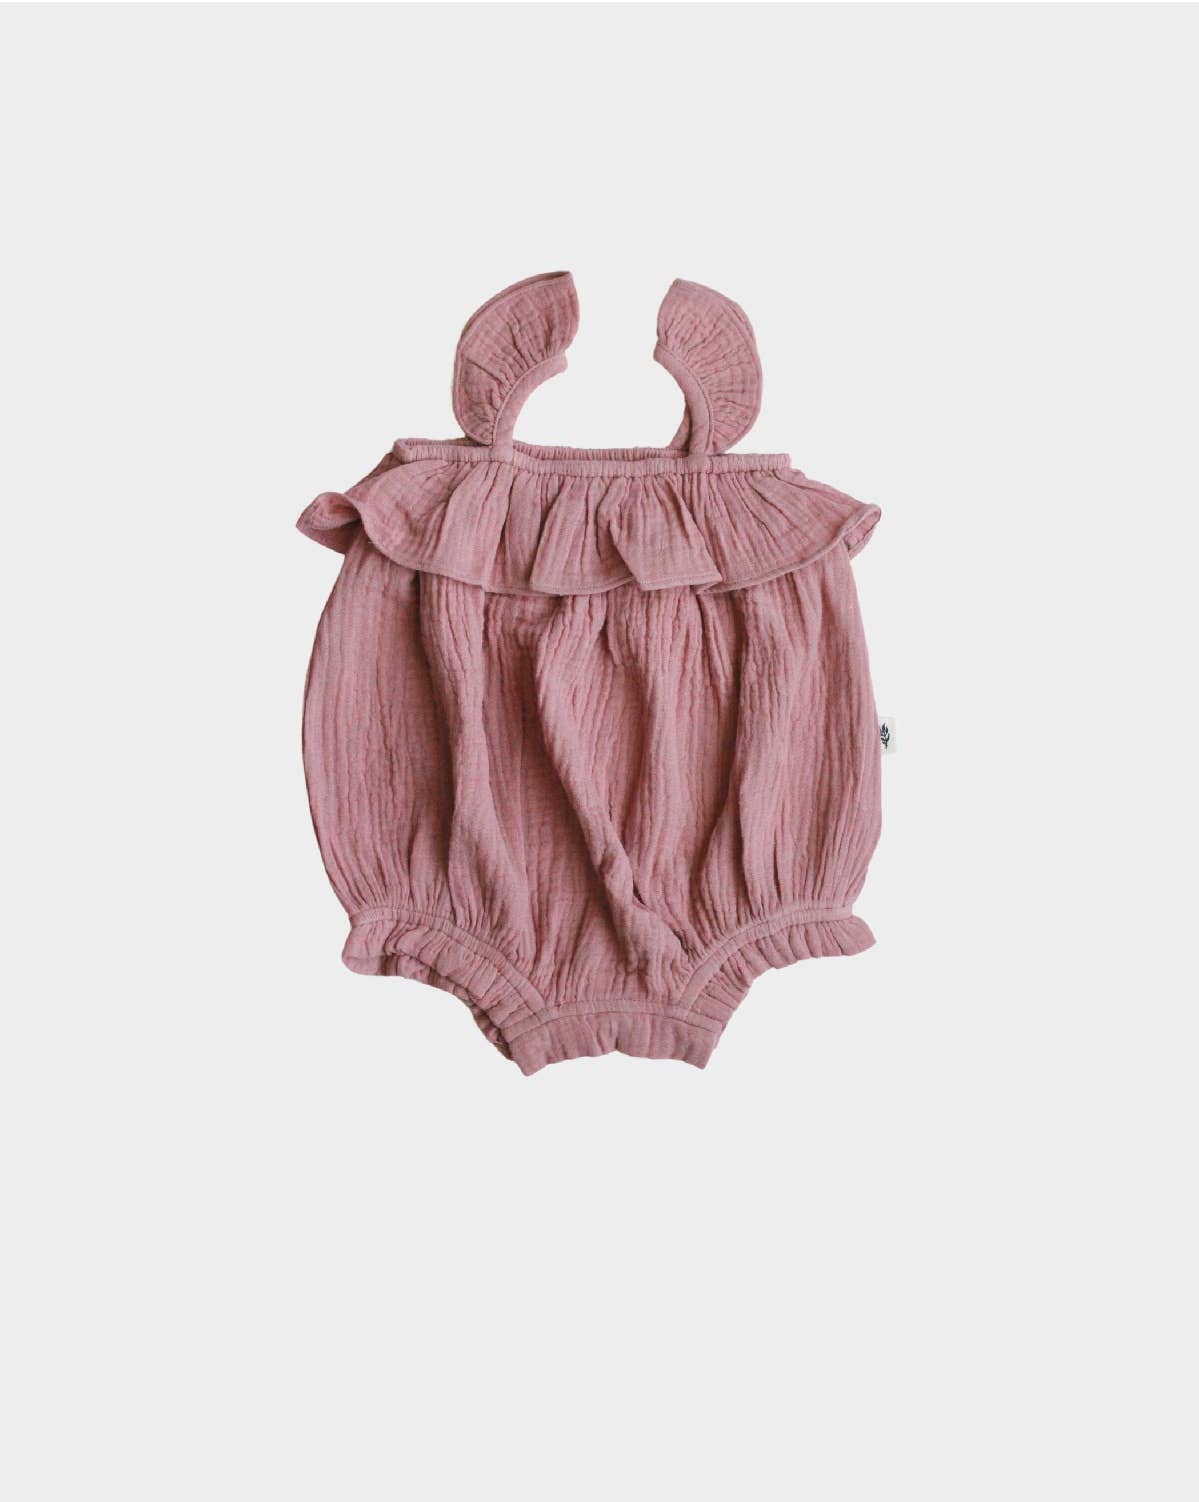 babysprouts clothing company - S23 D2: Baby Girl Bubble Romper in Dark Rose - kennethodaniel